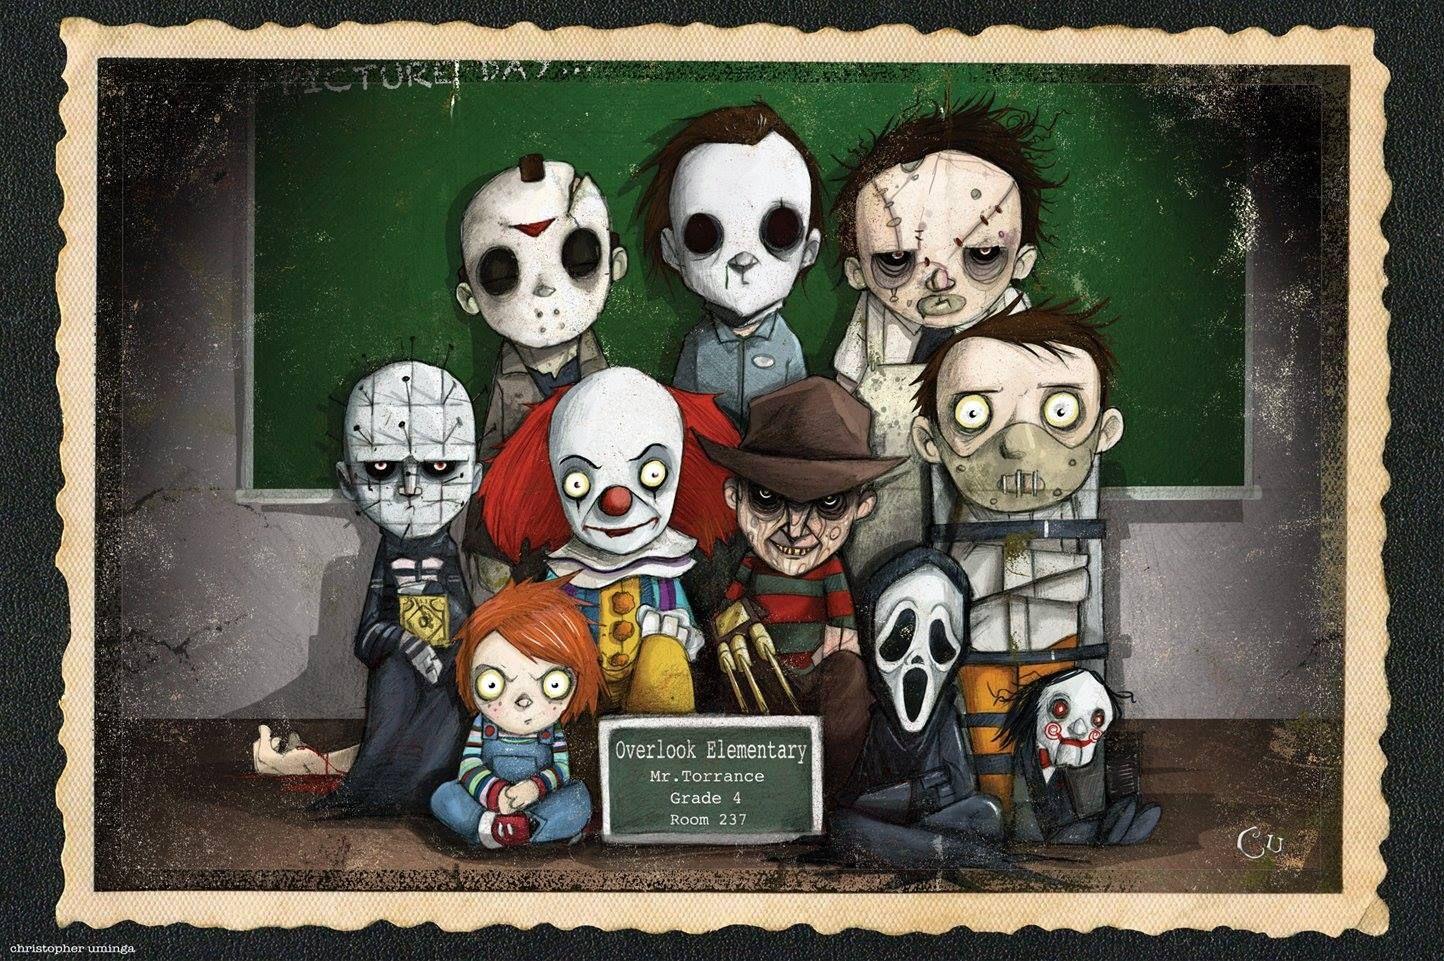 HD wallpaper, Leatherface, Chucky, Michael Myers, Freddy Krueger, Scream, Jason Voorhees, Ghostface, Movie Characters, Pennywise, Christopher Uminga, Saw, The Shining, Jigsaw, Hannibal Lecter